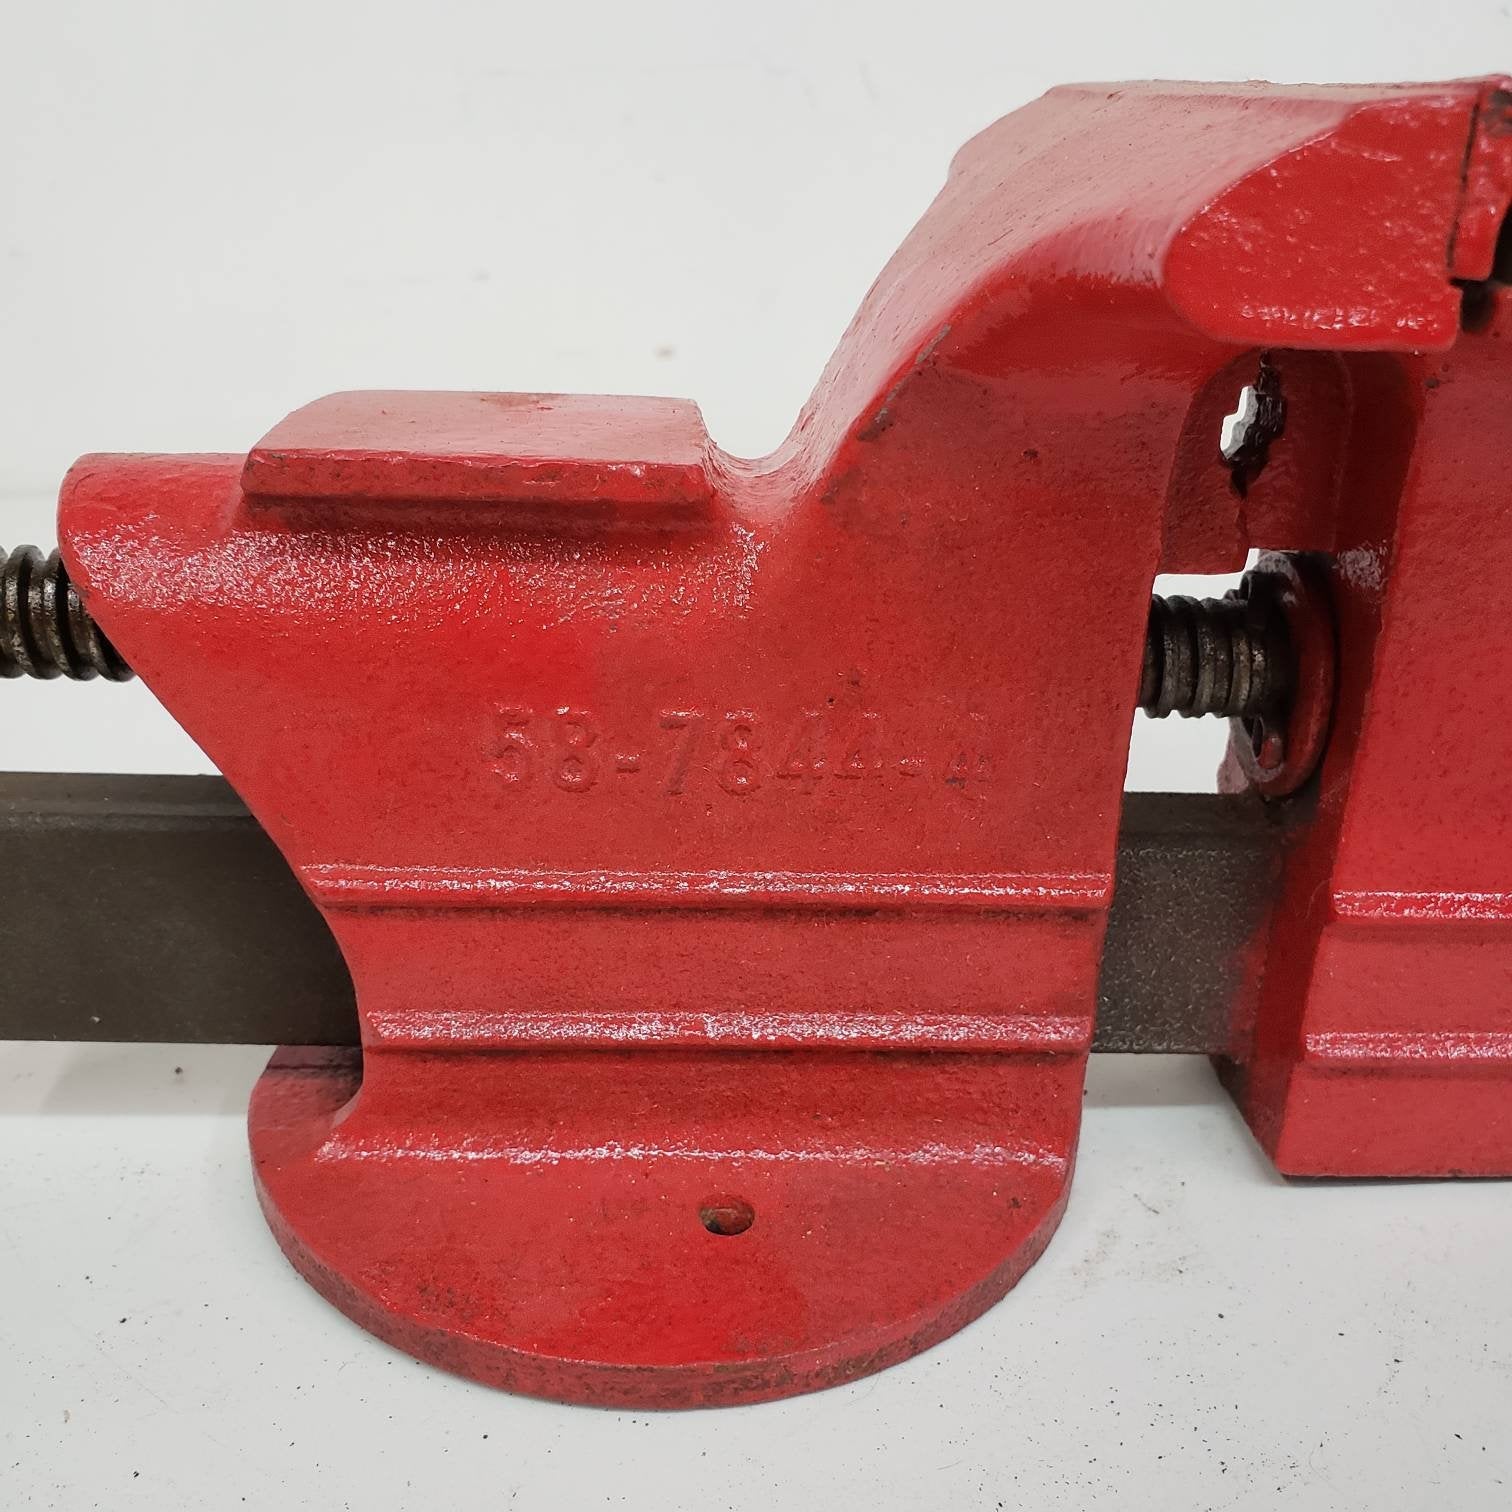 benchtop vise workbench tool additions